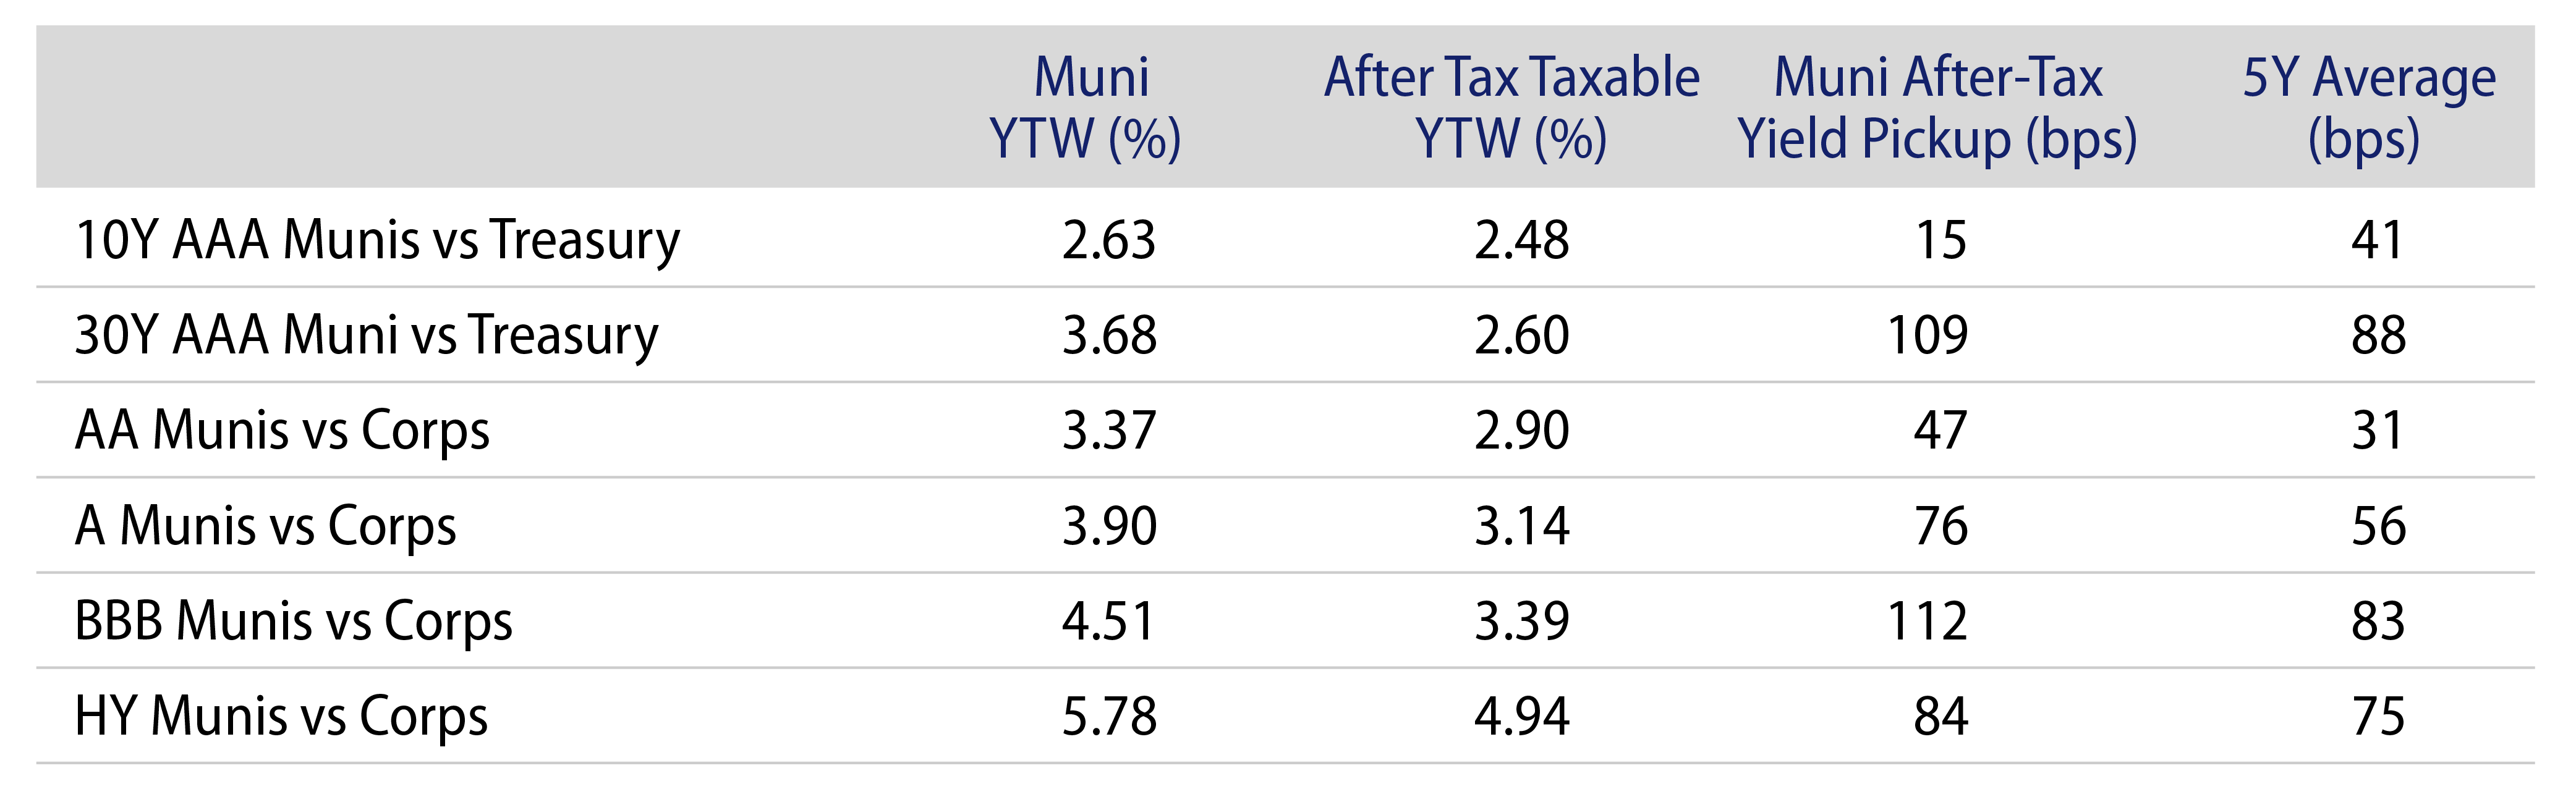 Explore Municipal vs. Taxable Fixed-Income Yields by Quality